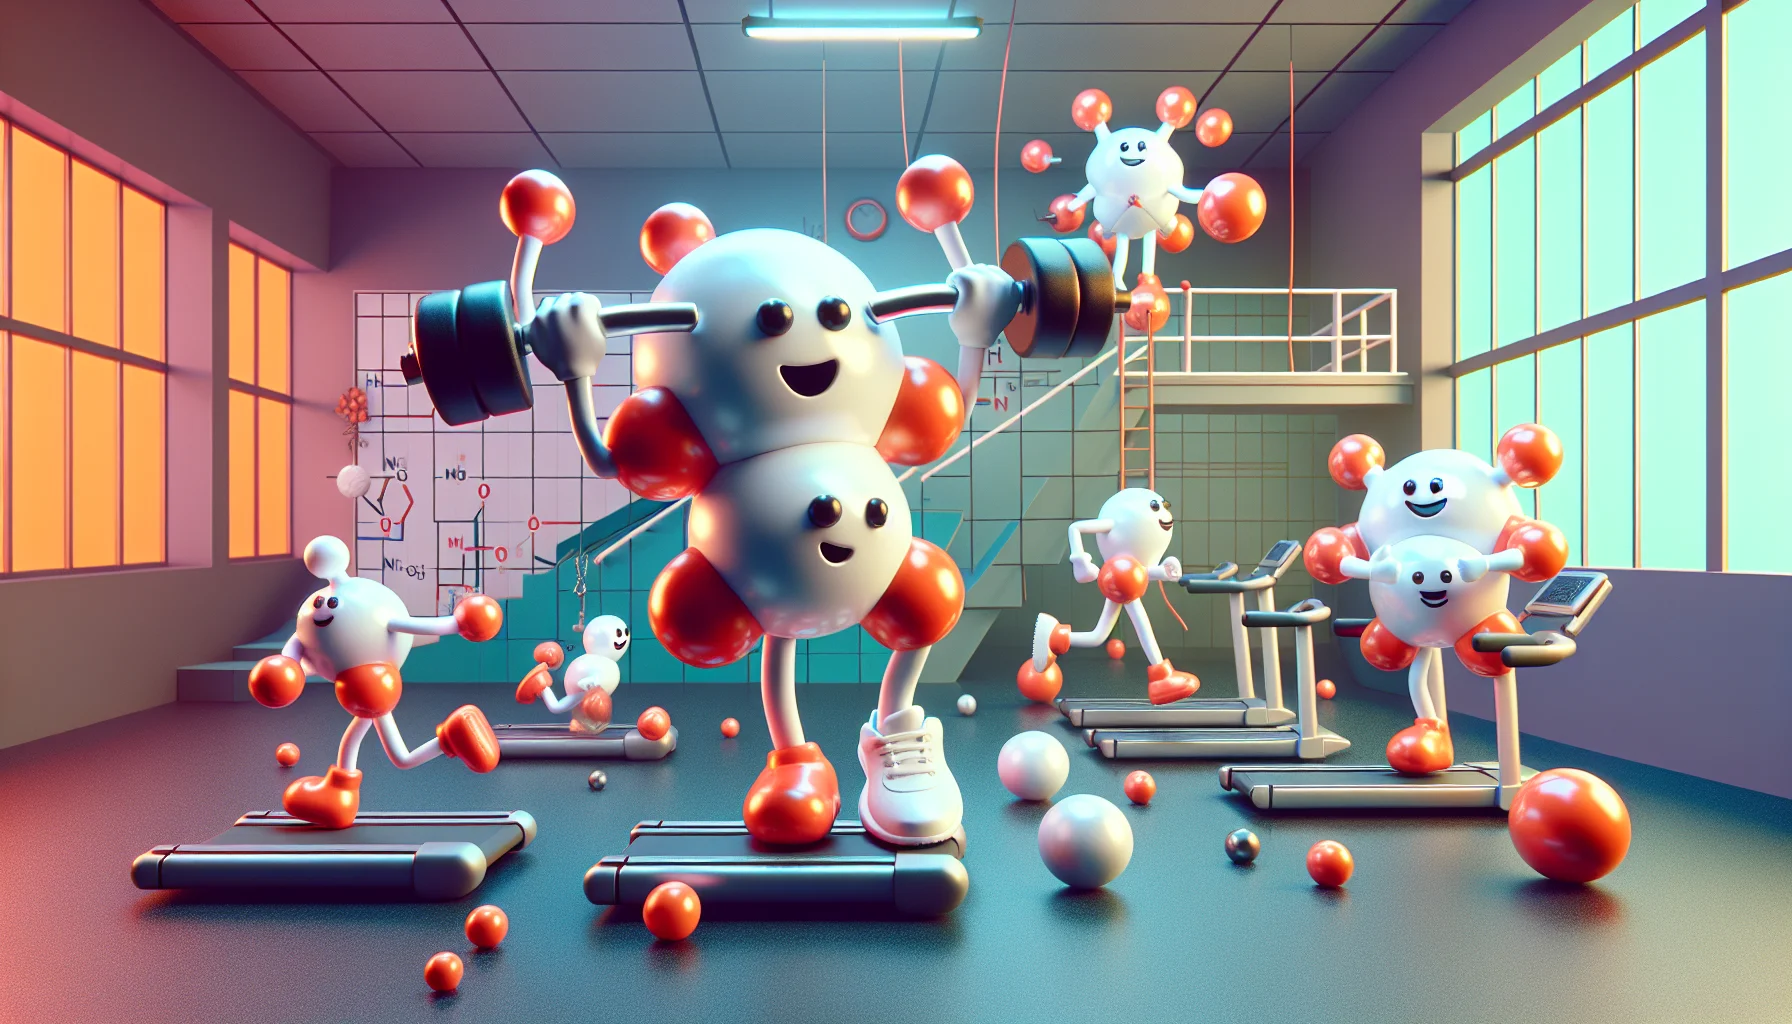 Design a playful and imaginative scene where anthropomorphized magnesium and potassium aspartate molecules are acting like personal trainers at a gym. They are showing off their strength and agility, inspiring those around them. Magnesium is lifting a huge dumbbell effortlessly, showcasing its potential benefits on muscle performance. Potassium, on the other hand, is sprinting on a treadmill, emphasizing its role in maintaining energy and reducing fatigue. Other smaller molecule figures are watching them in awe and getting motivated to join the fitness session. The surreal gym environment and characterful molecules make the image amusing and appealing.